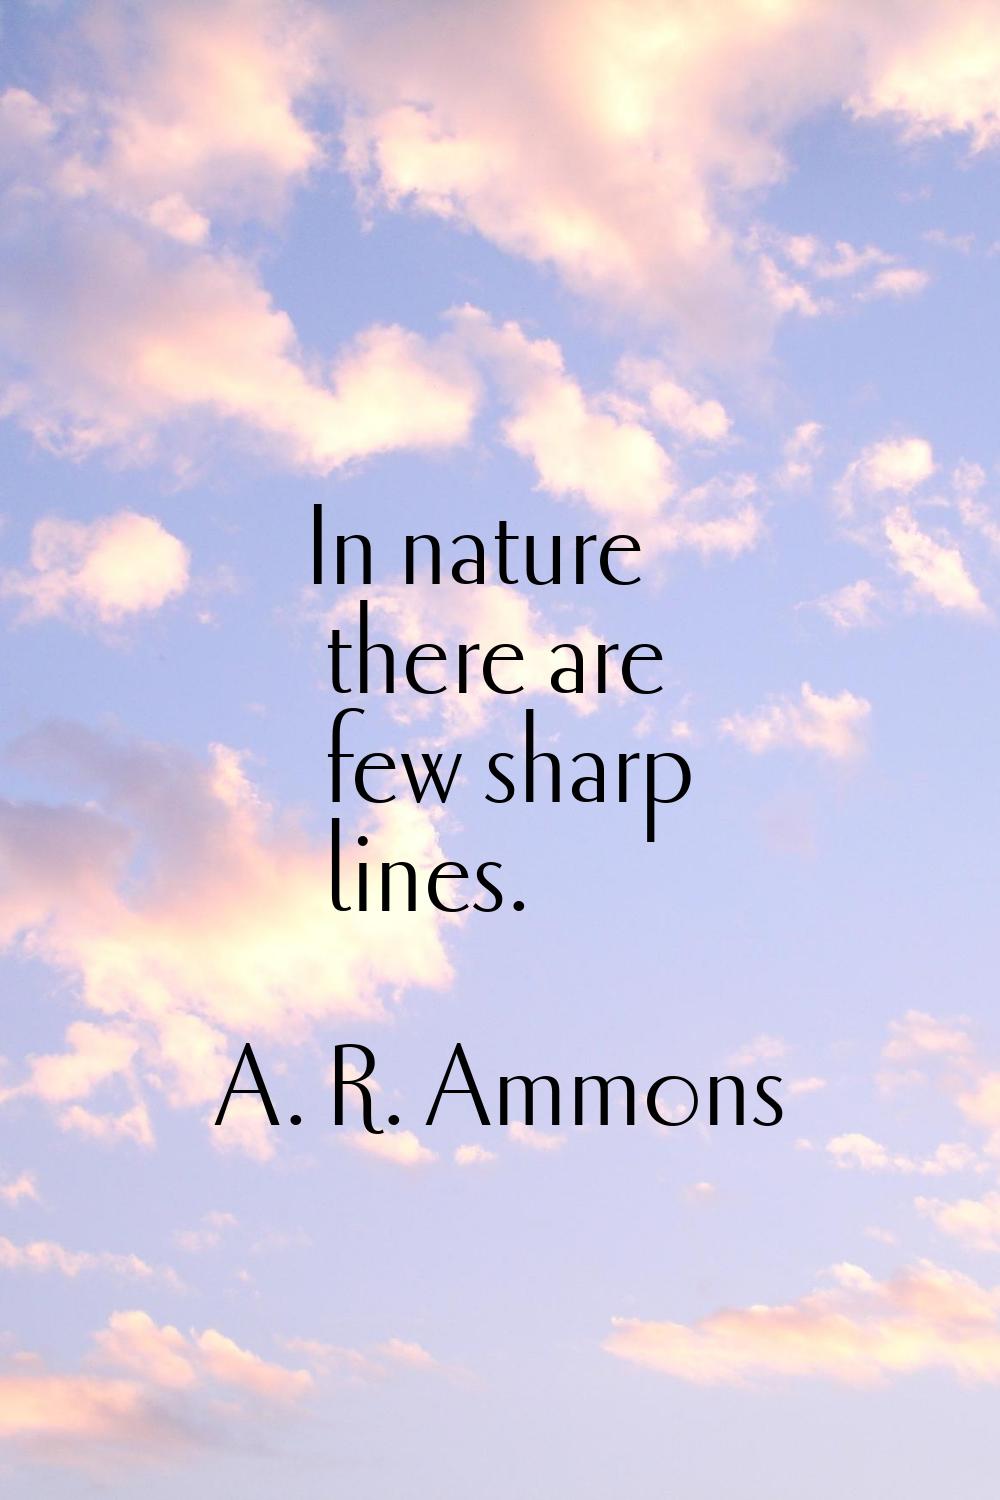 In nature there are few sharp lines.